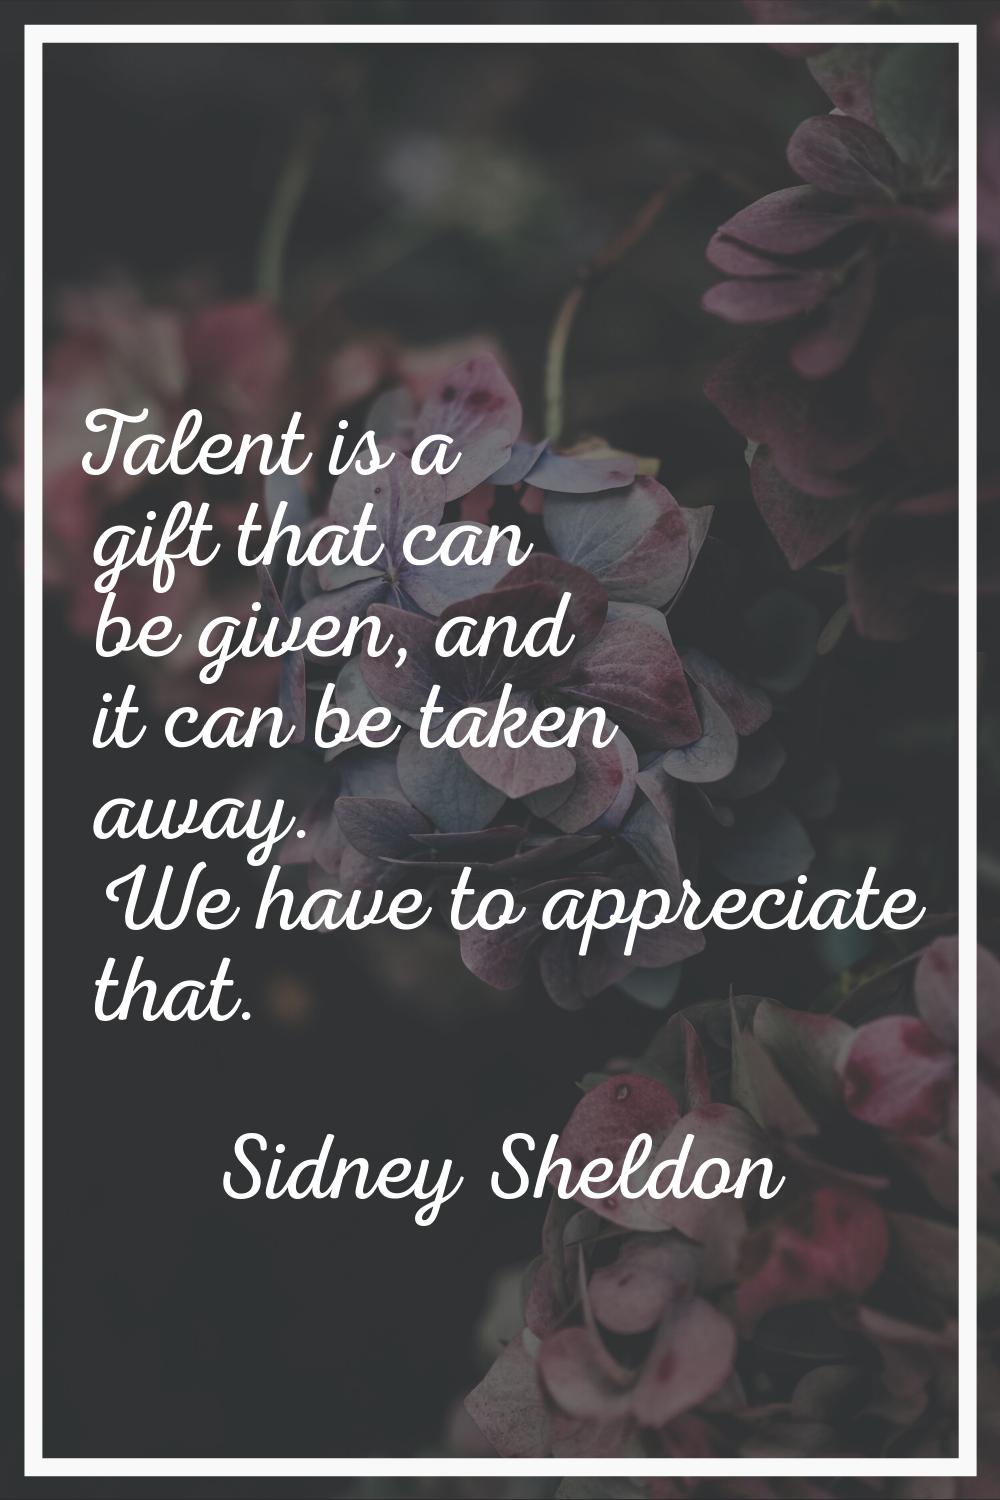 Talent is a gift that can be given, and it can be taken away. We have to appreciate that.